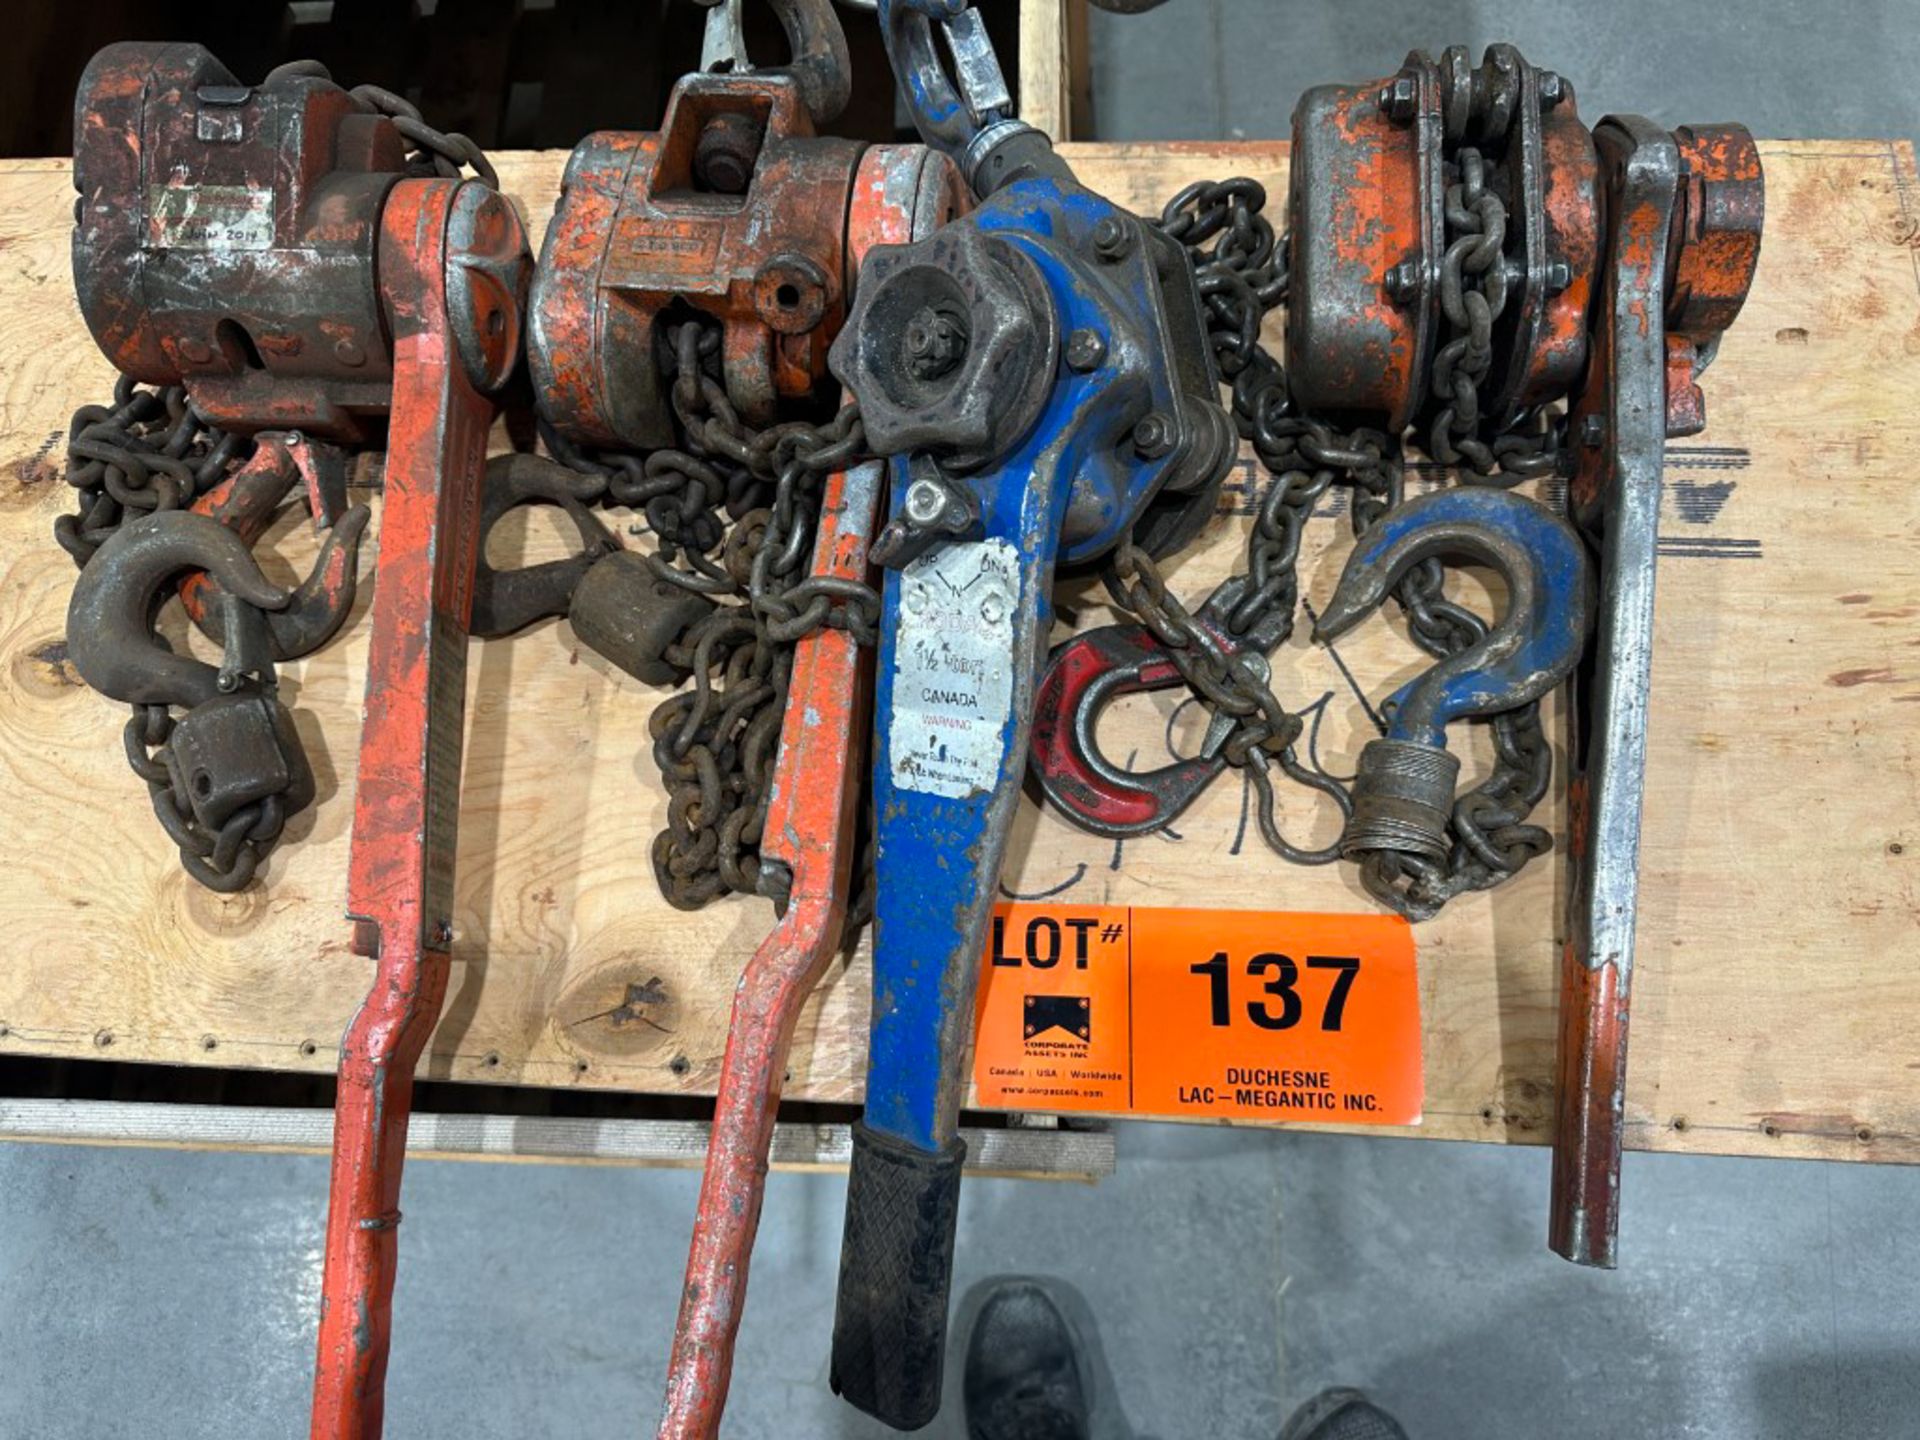 LOT/ skid and contents - rigging and lifting supplies